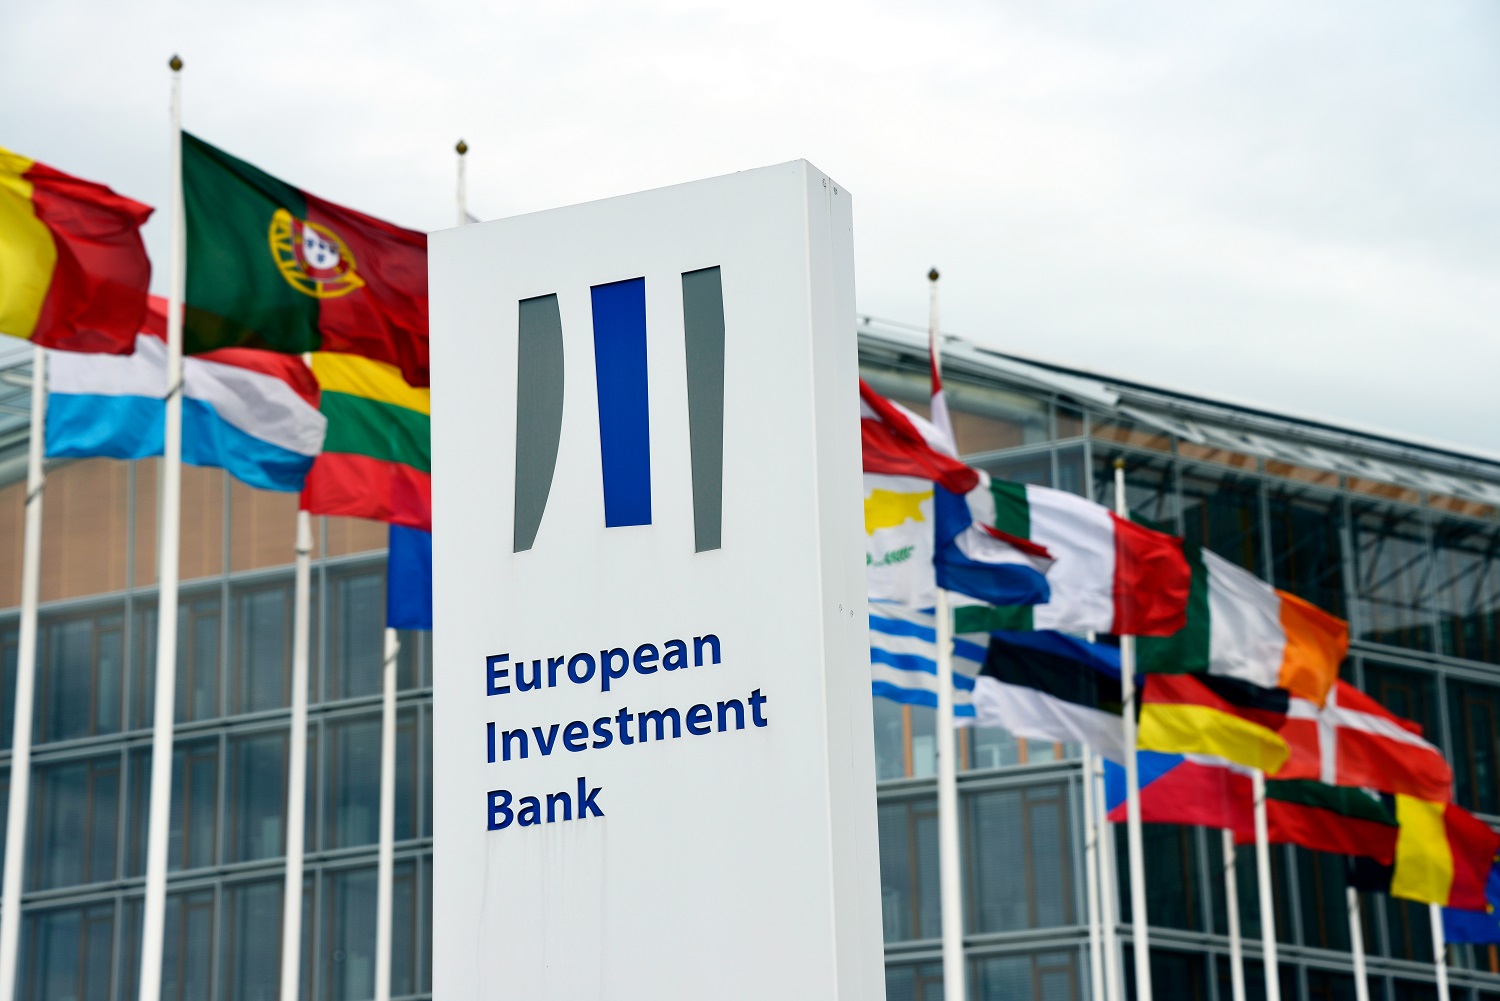 Image of European Investment Bank sign 